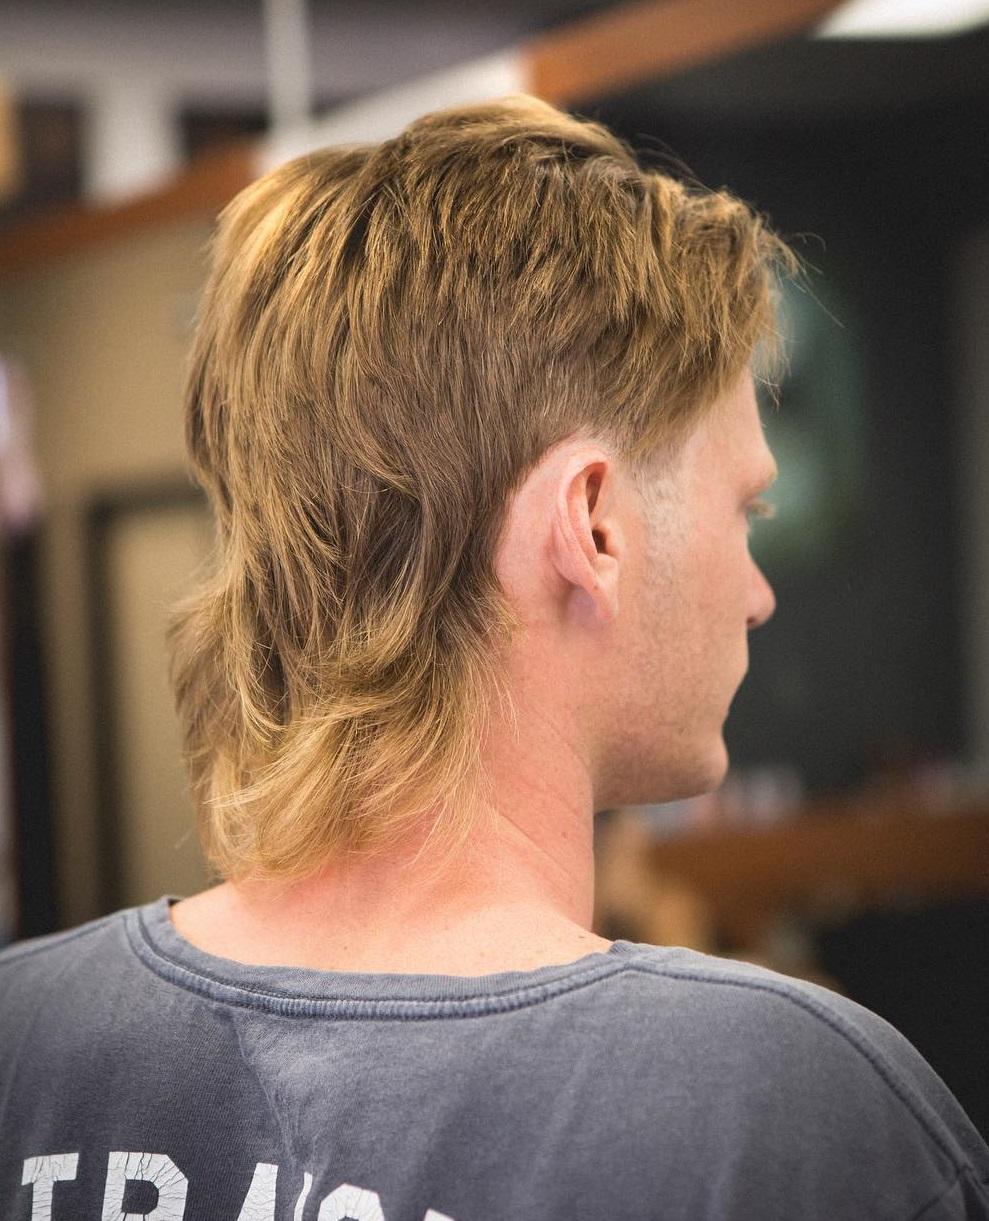 Medium Is The Mullet Haircut Coming Back In Style 